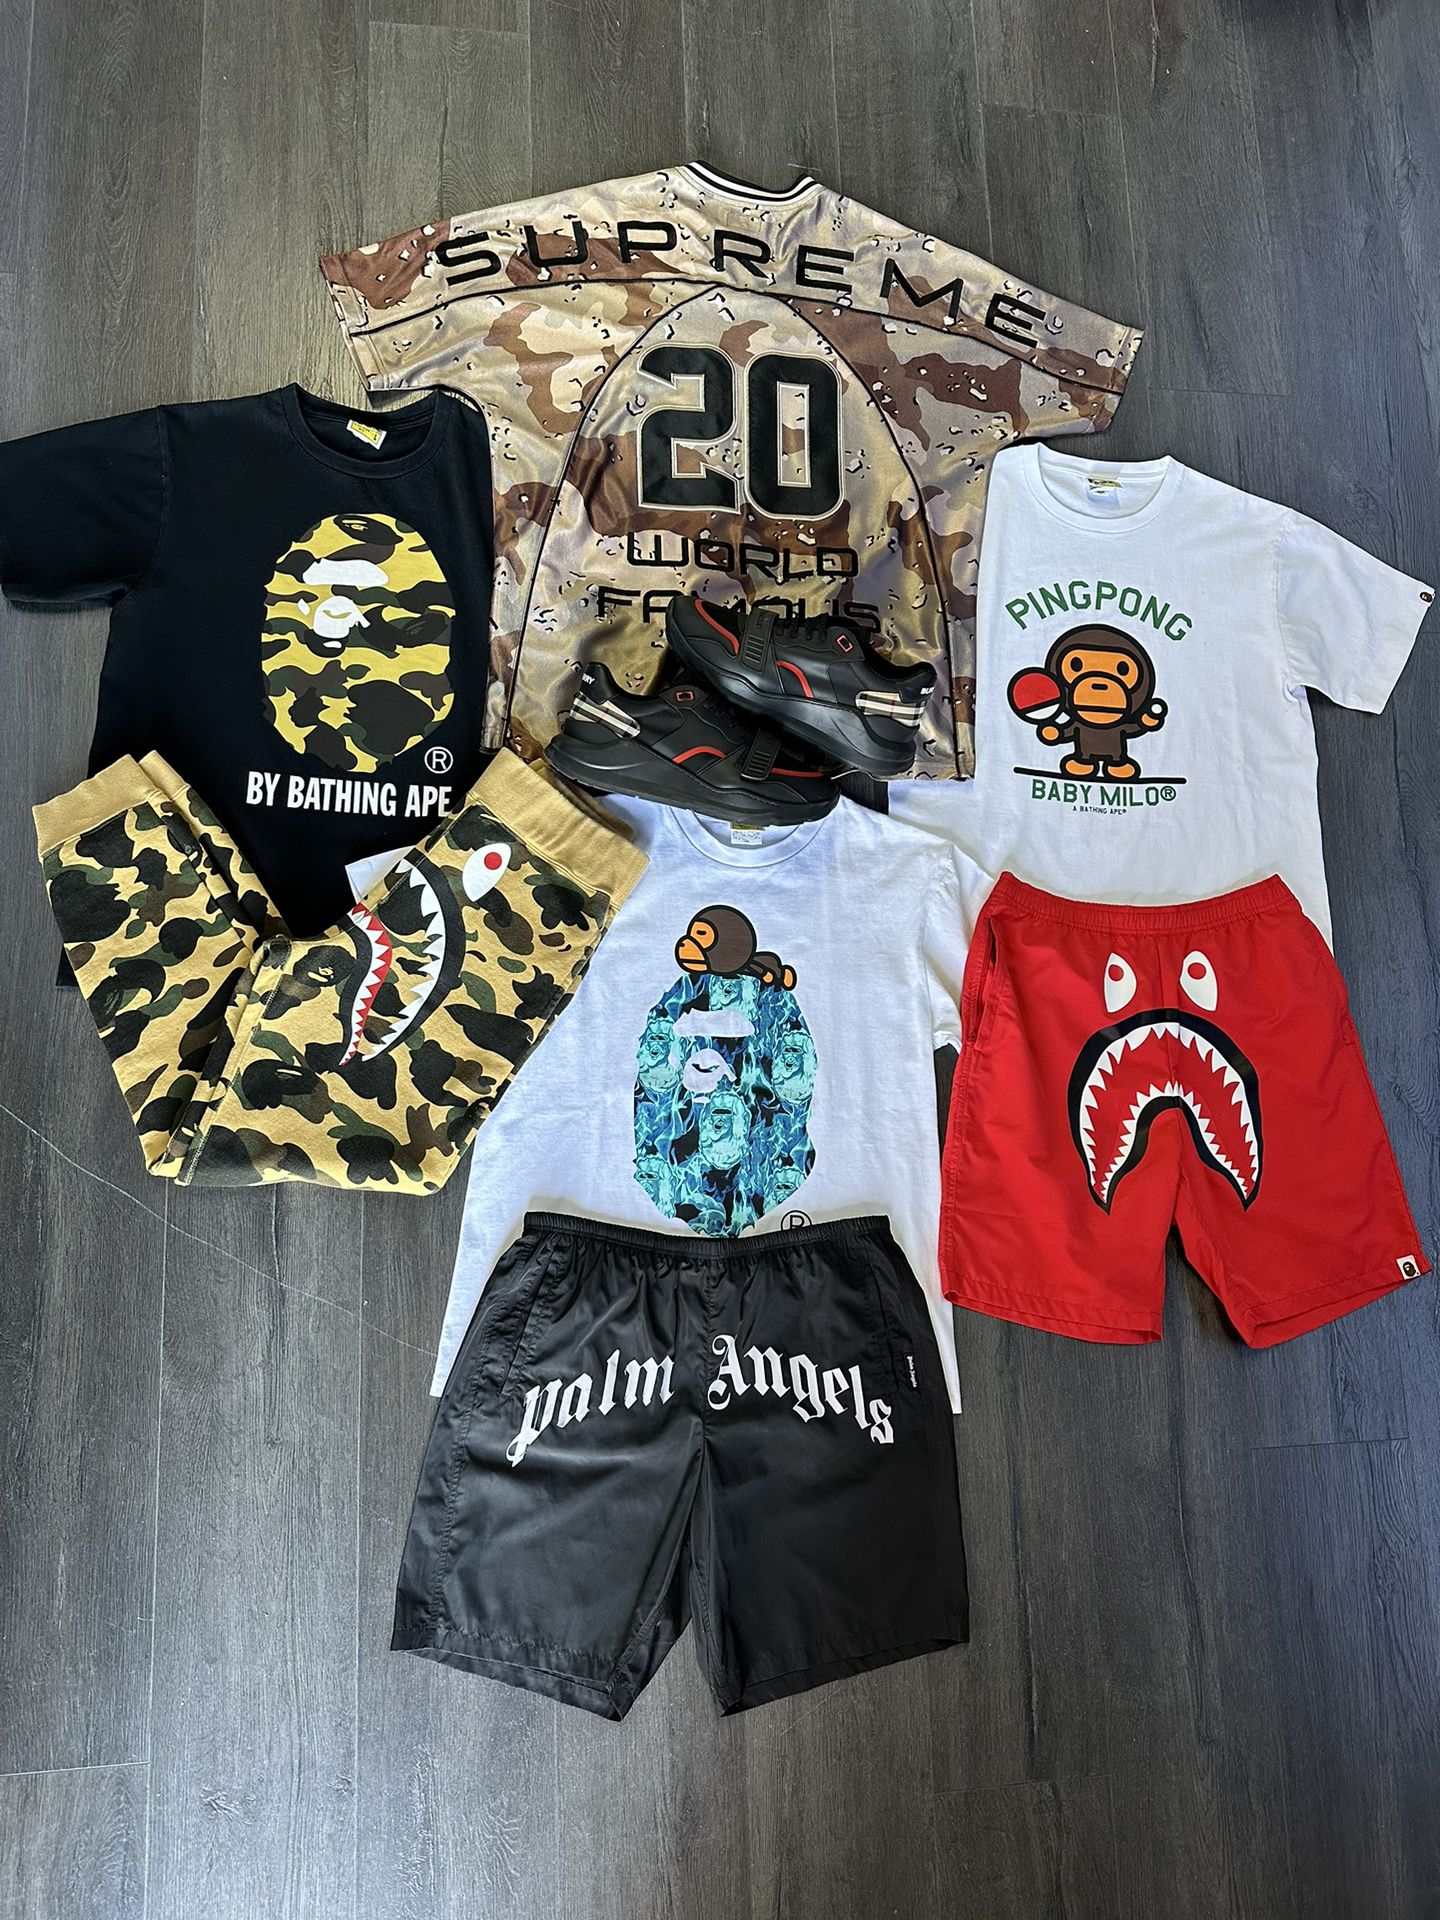 Streetwear Available!